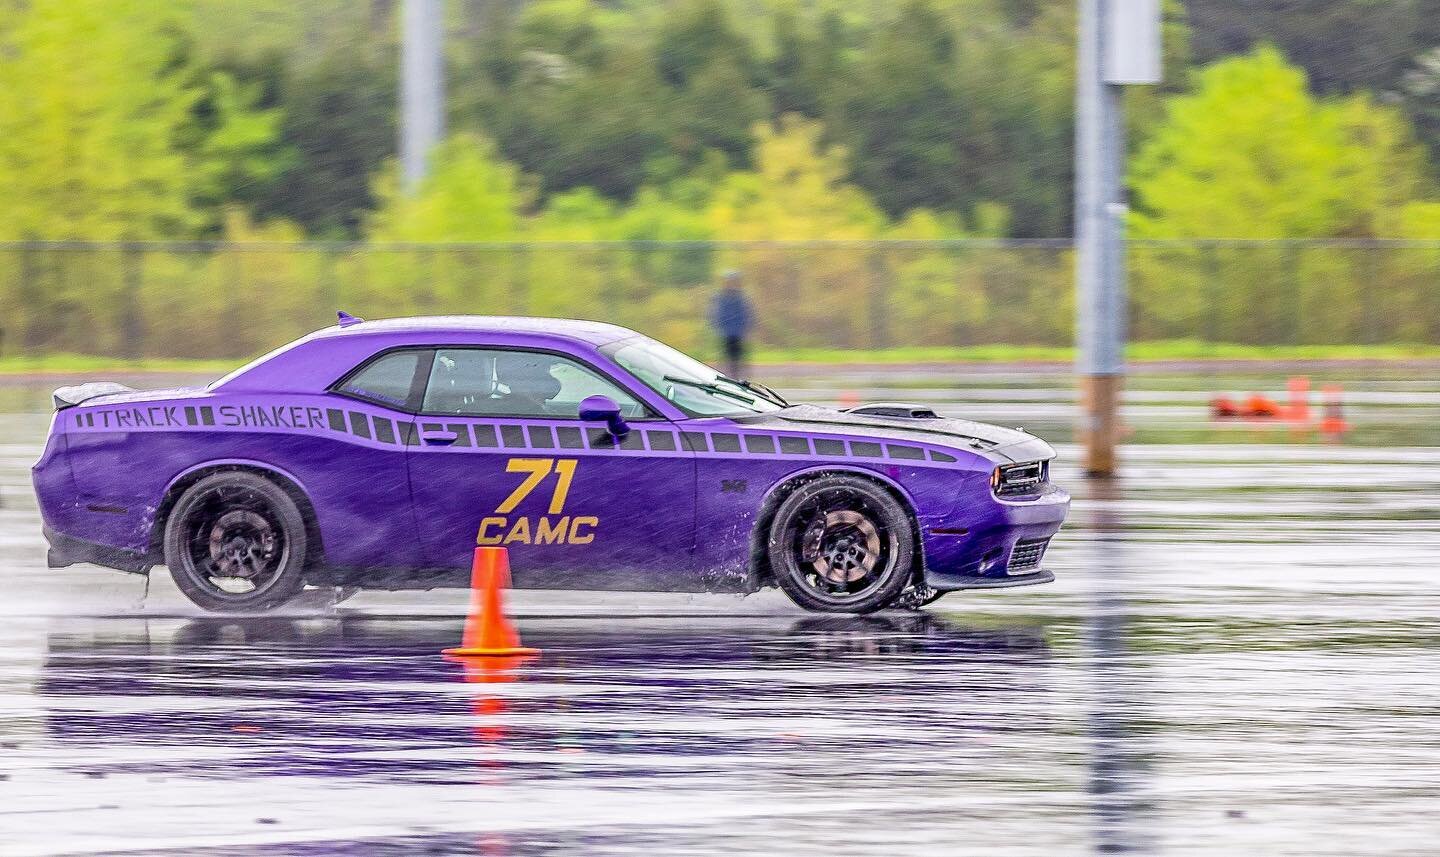 ☔️Water Skiing🌧 
I think this autocross was inadvertently my introduction to drifting 😆 
📸 @traddsphotos 
.
.
#trackshaker #scca #autocross #autox #automotivephotographer #autopic #autophoto #autogram #automotivedaily #automotivegramm #automotiveg